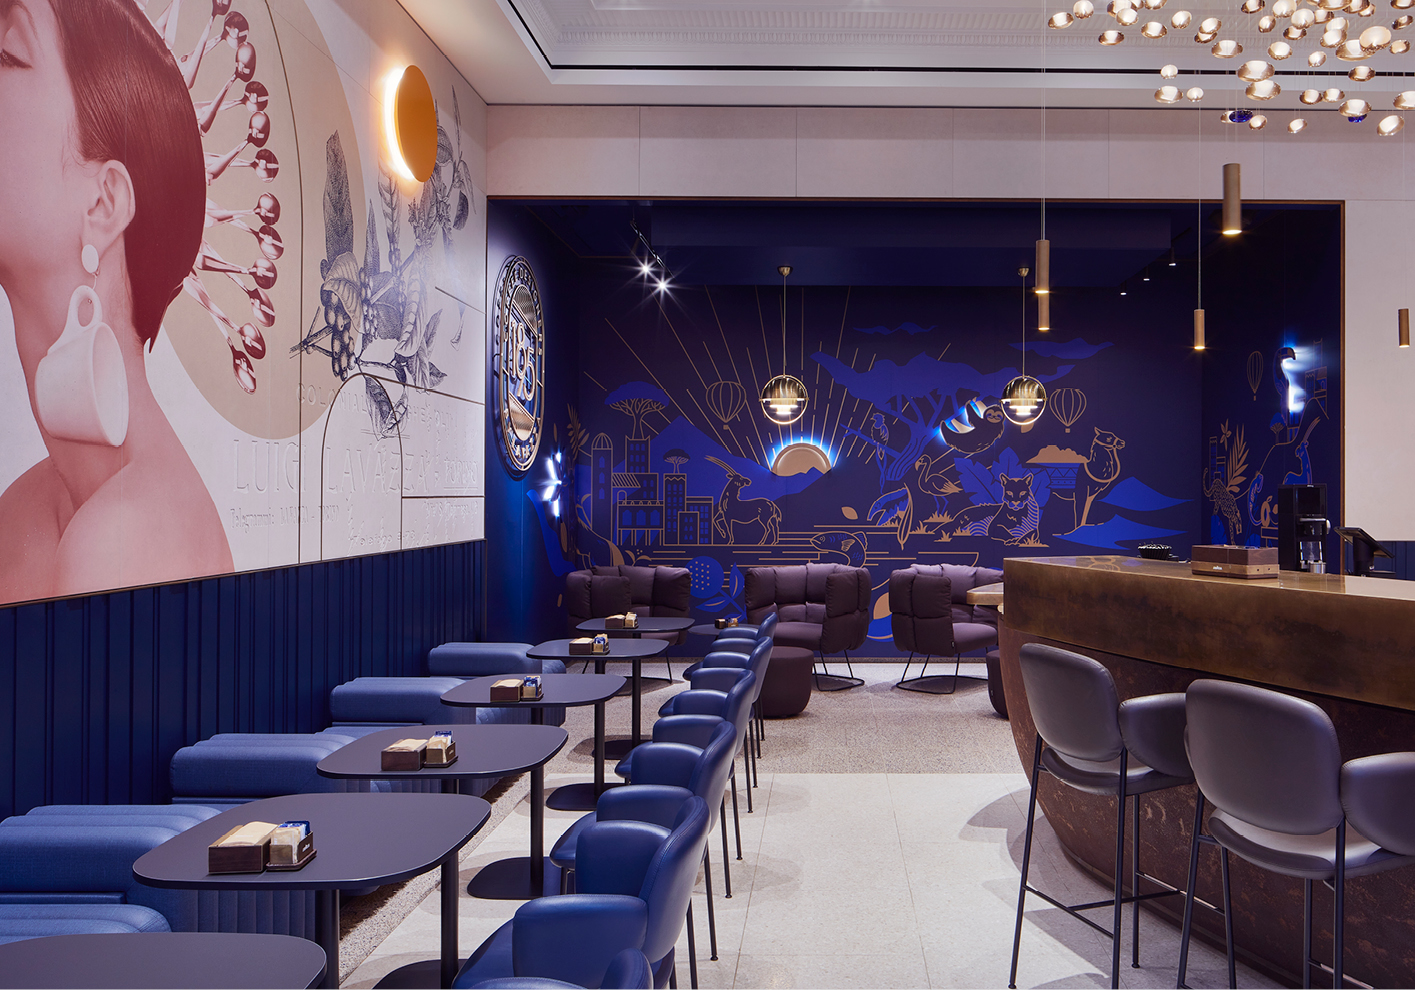 The flagship is a grand space in which customers can immerse themselves in large coffee-themed artworks